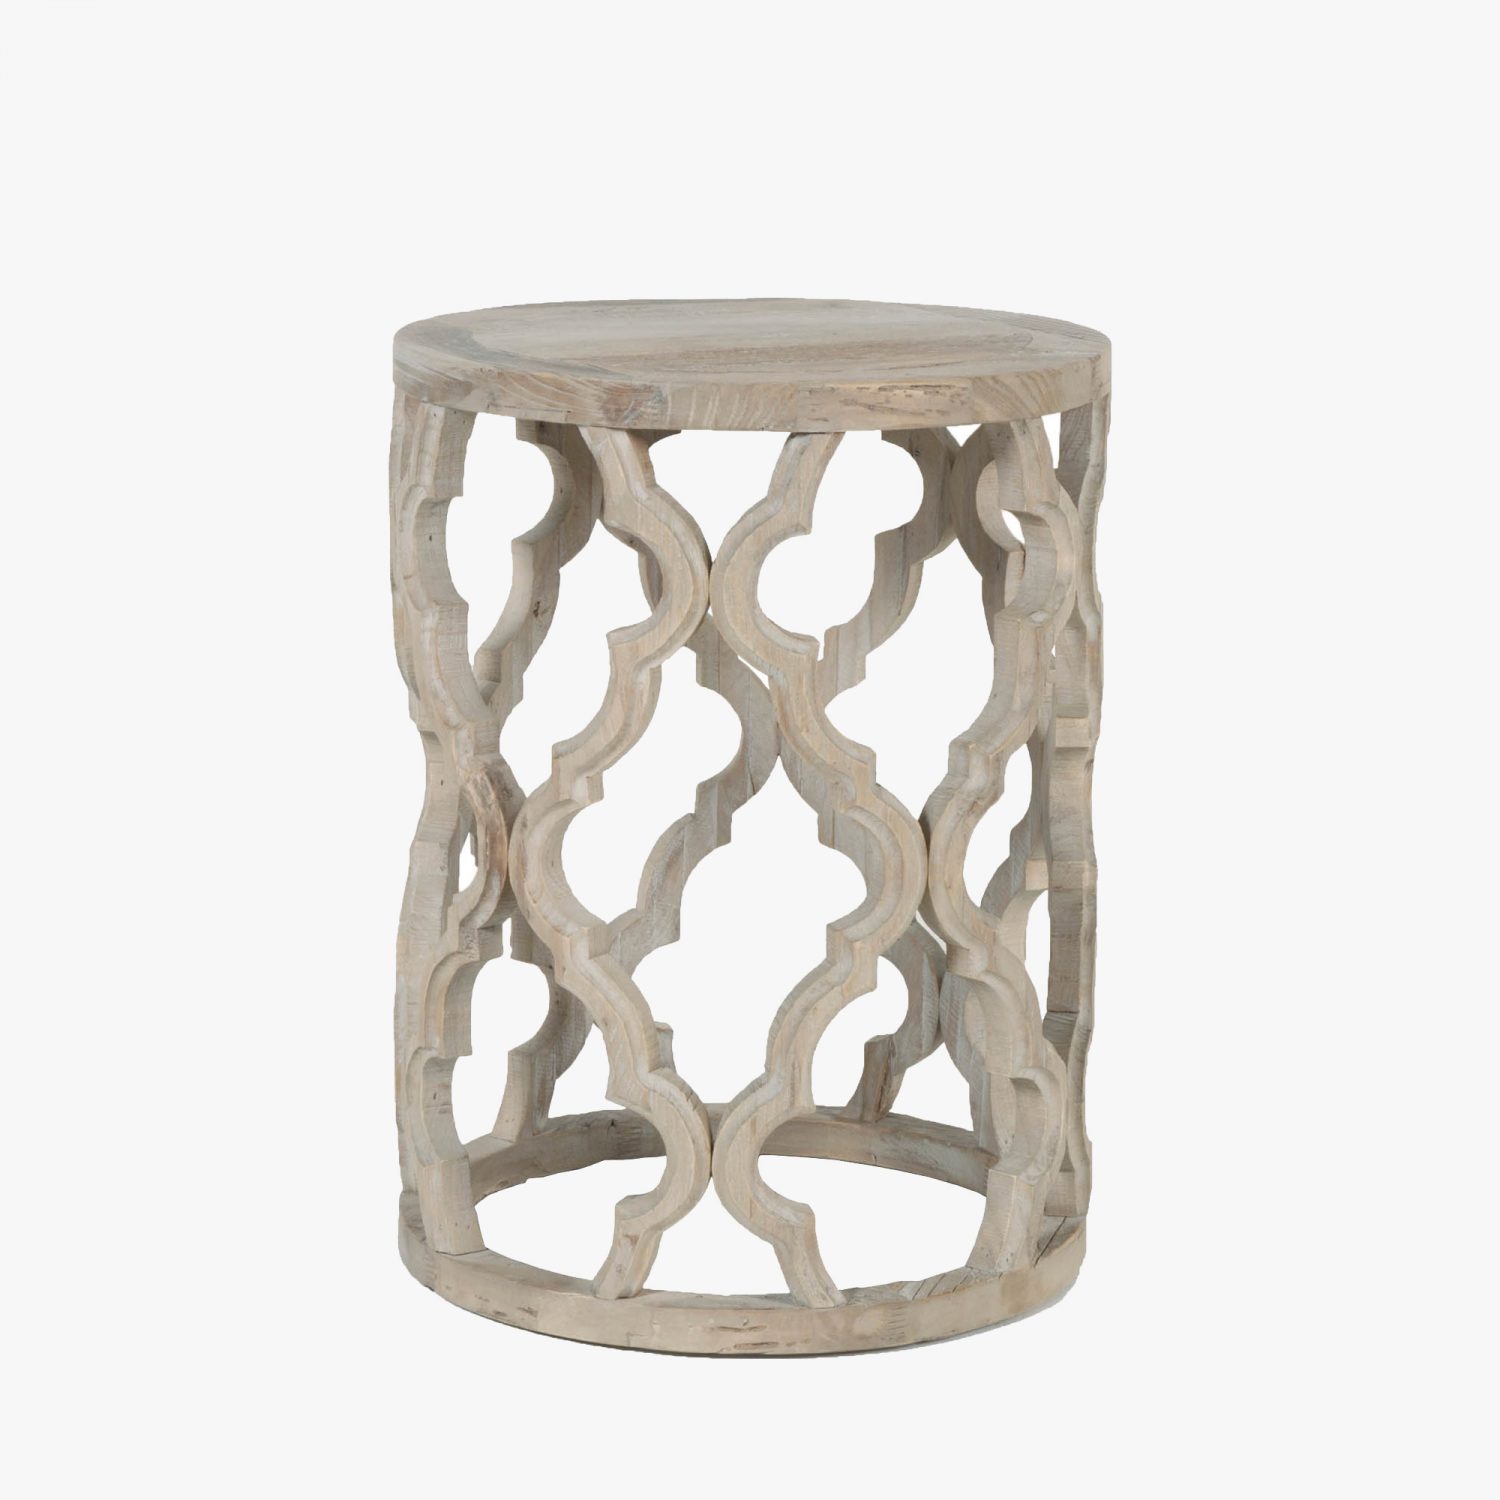 carved quatrefoil side table accent tables dear keaton under round telephone rose gold end west elm design services target furniture coffee wicker outdoor retro bedroom timber